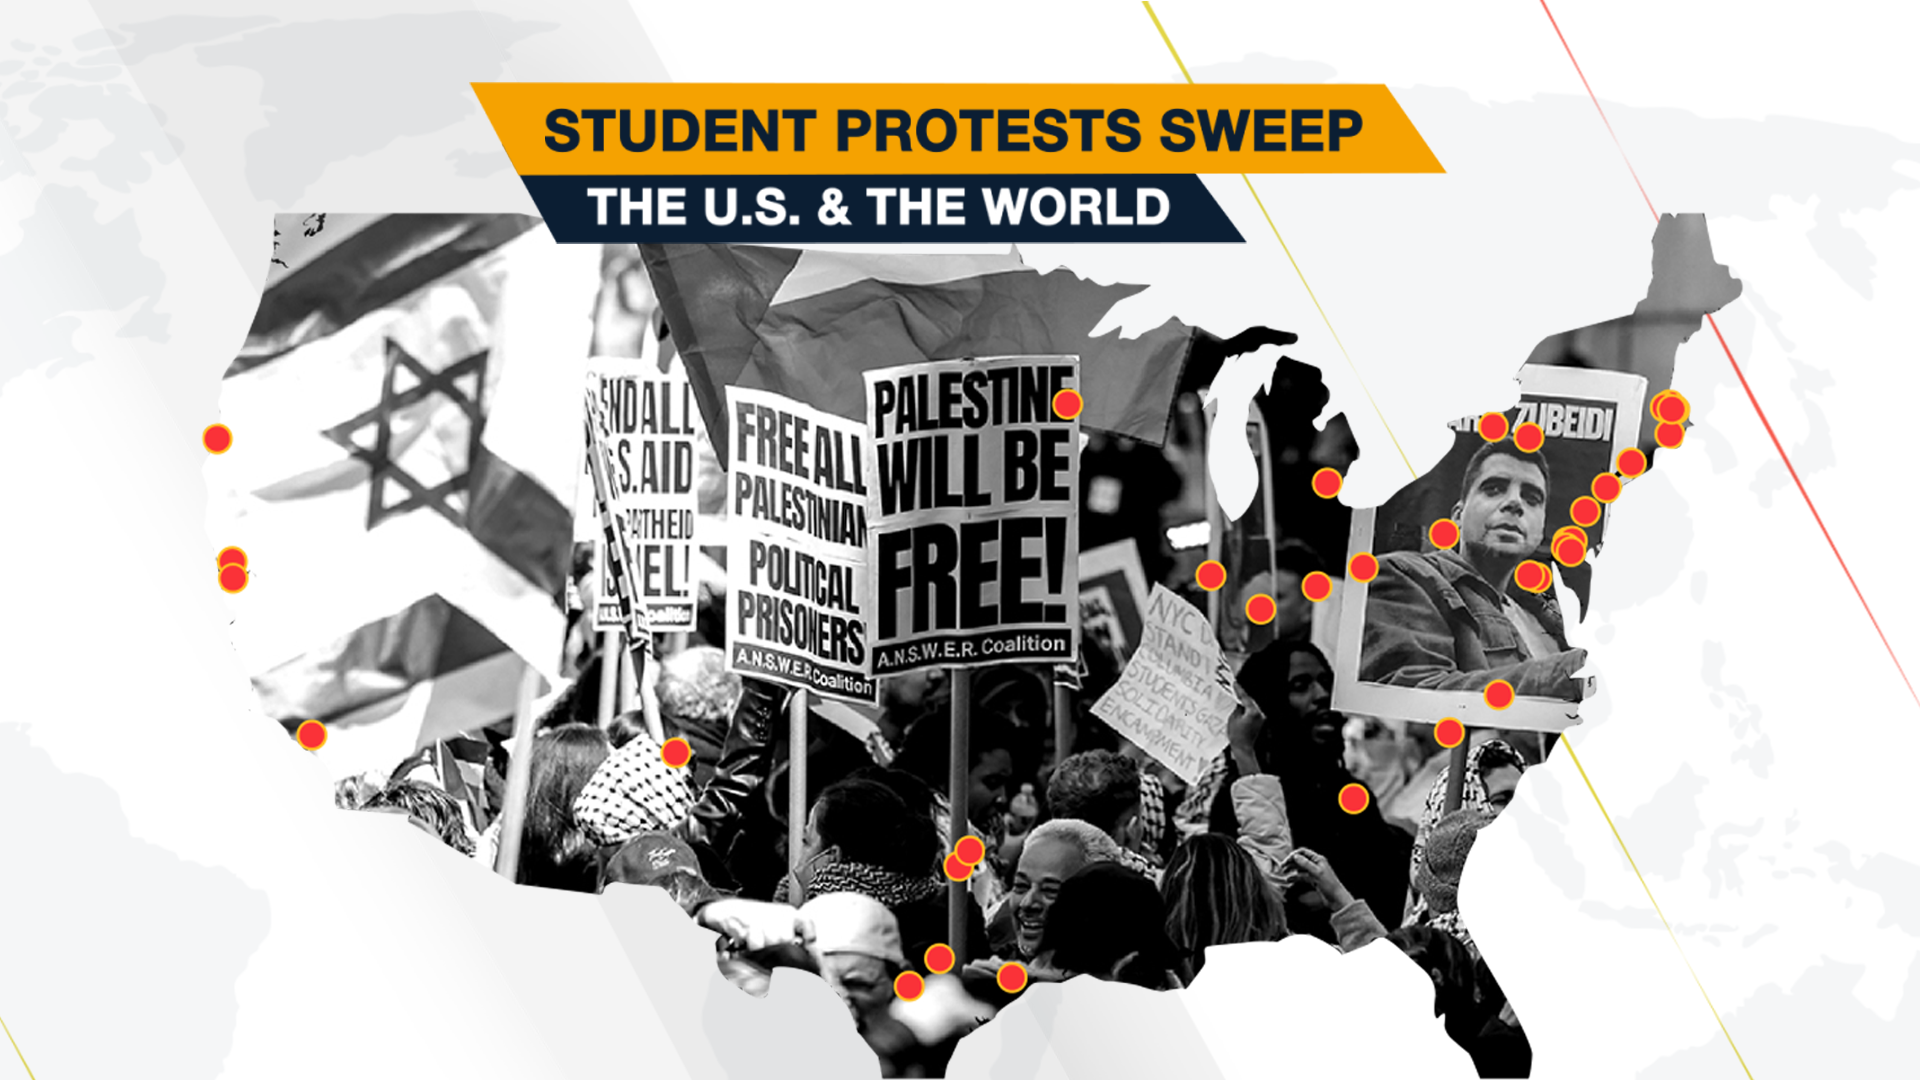 Students protests sweep US, world